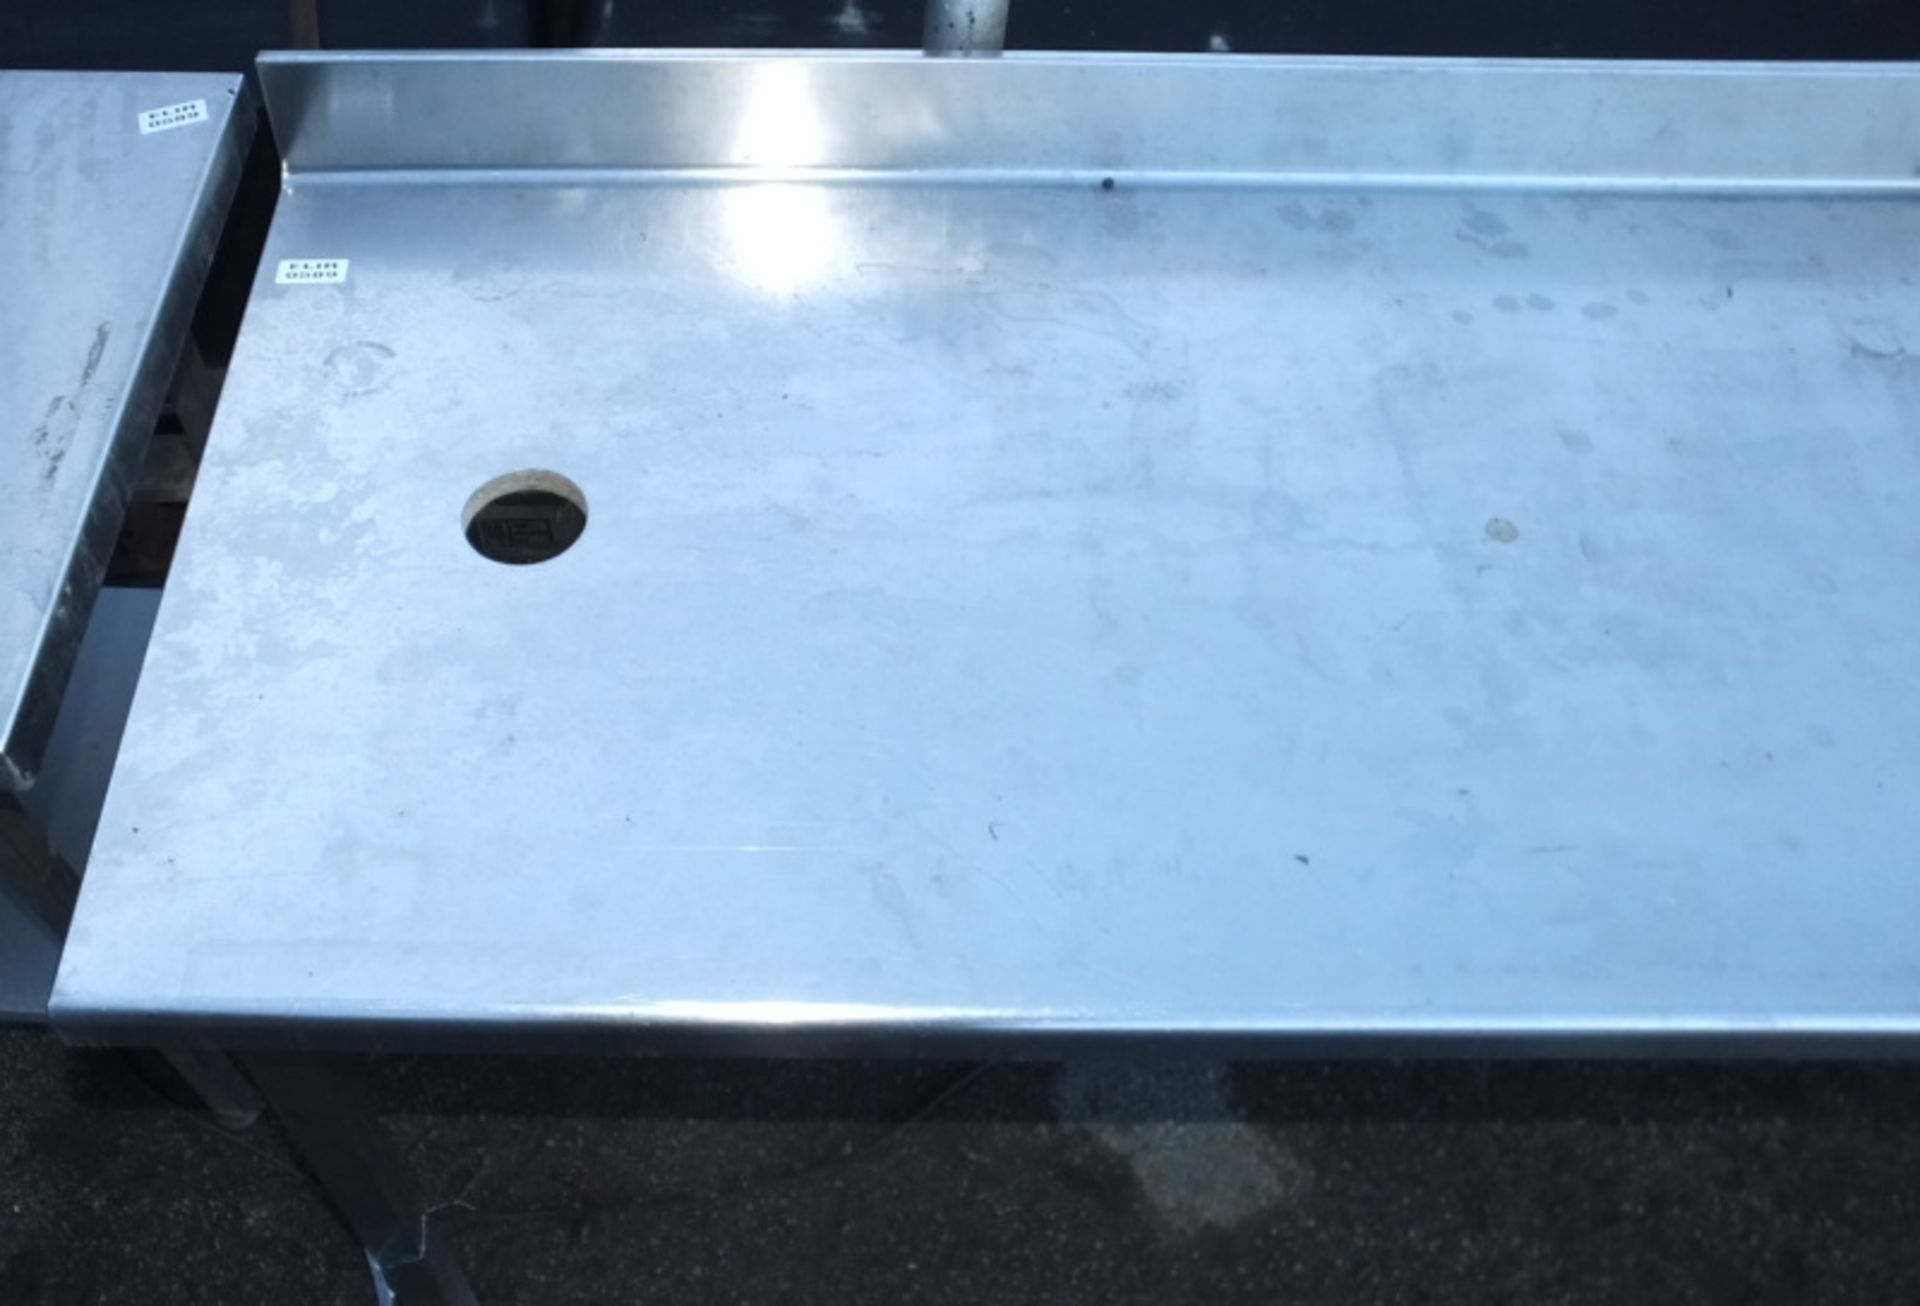 Stainless Steel Catering Preparation Table L 1200mm x D 700mm x H 950mm - Image 2 of 3